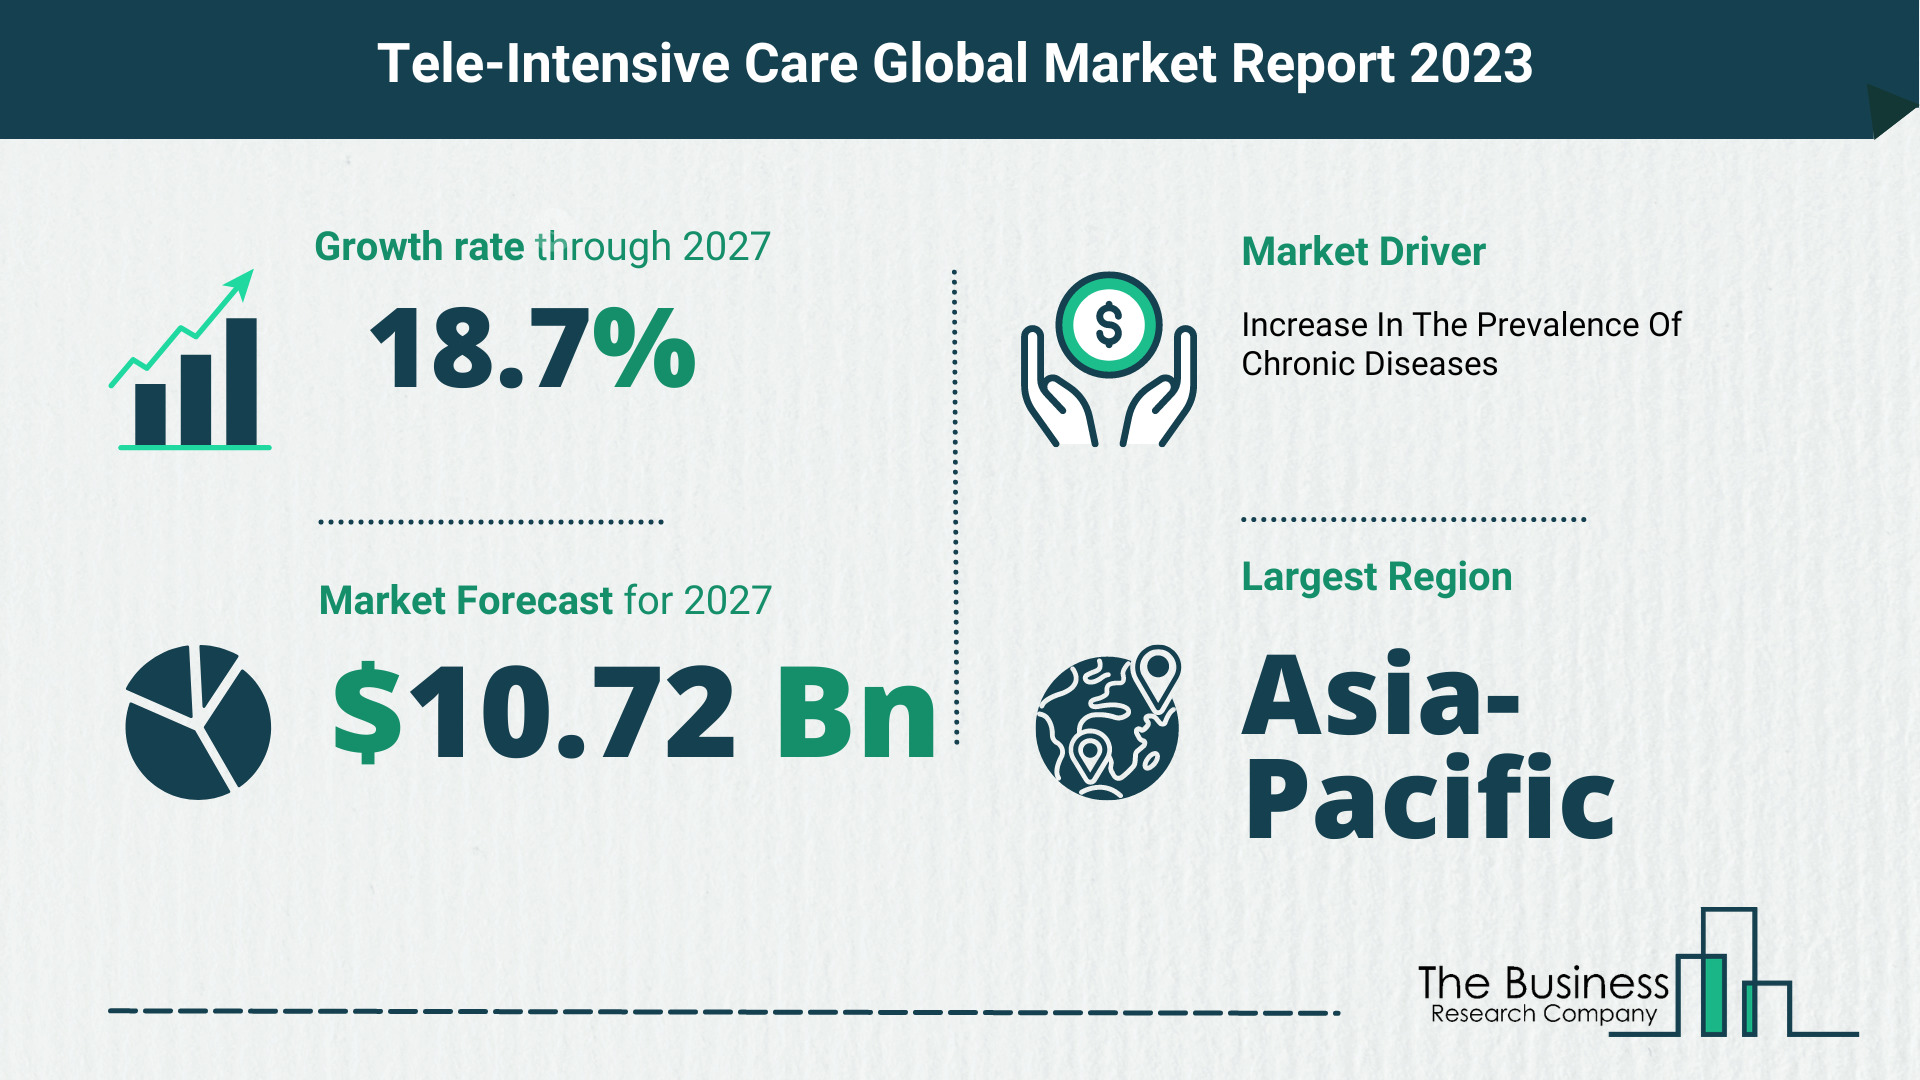 Tele-Intensive Care Market Size, Share, And Growth Rate Analysis 2023